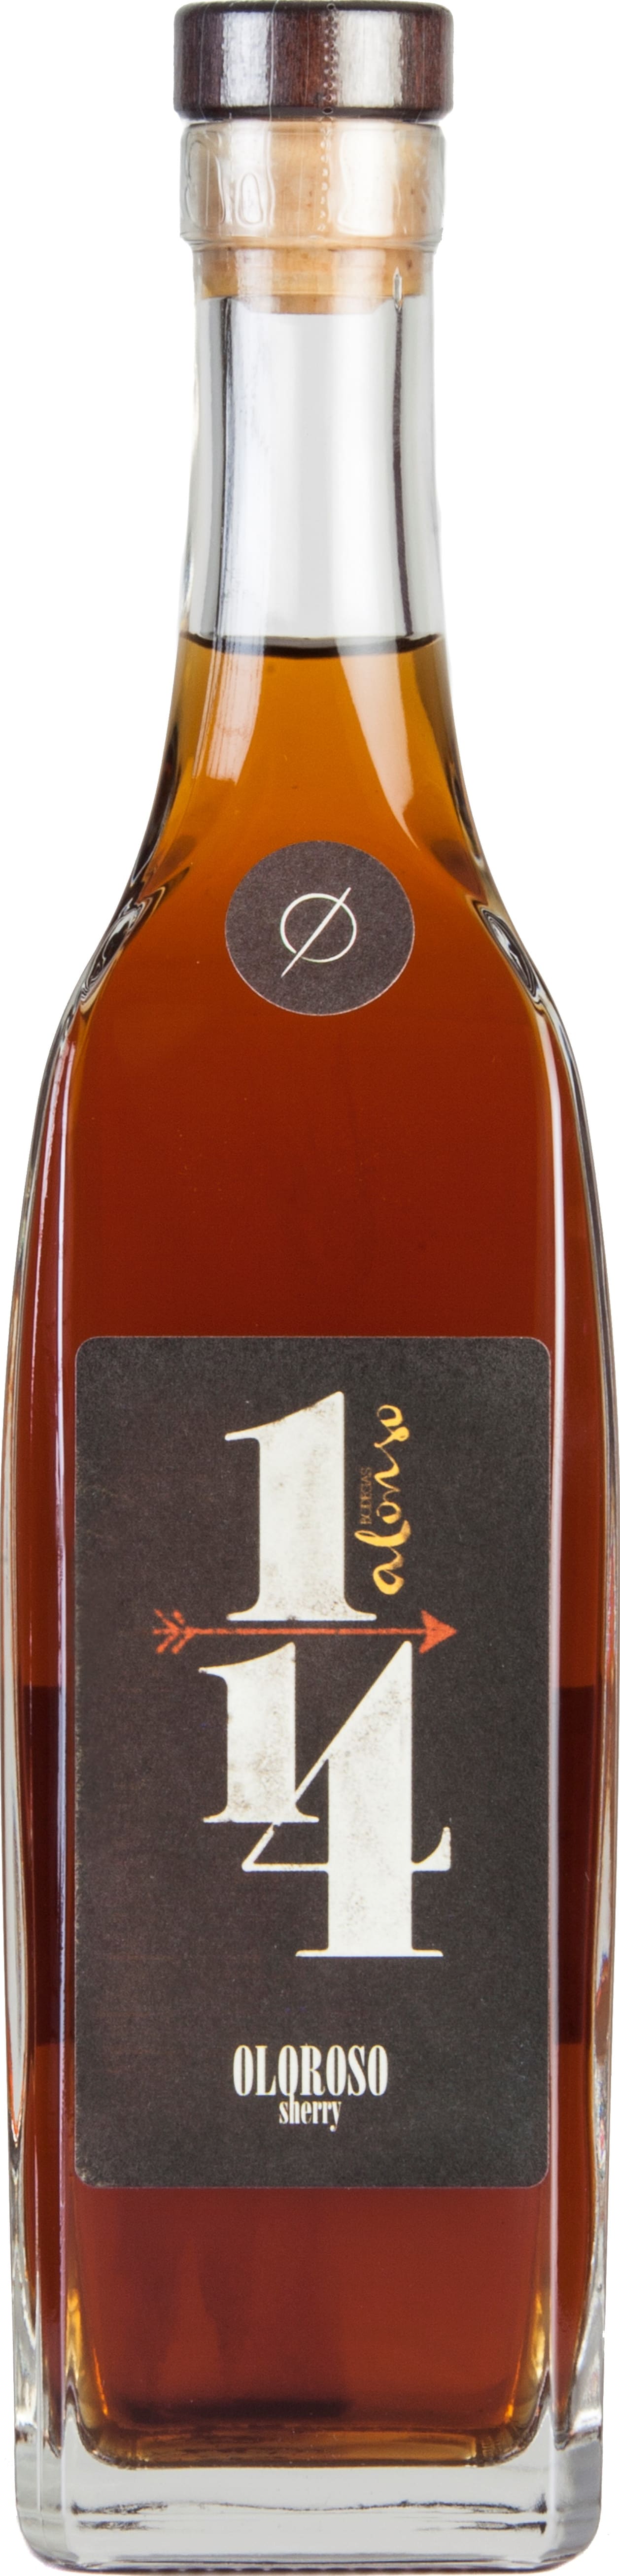 Bodegas Alonso 1/14 Oloroso 50cl 50cl NV - Buy Bodegas Alonso Wines from GREAT WINES DIRECT wine shop